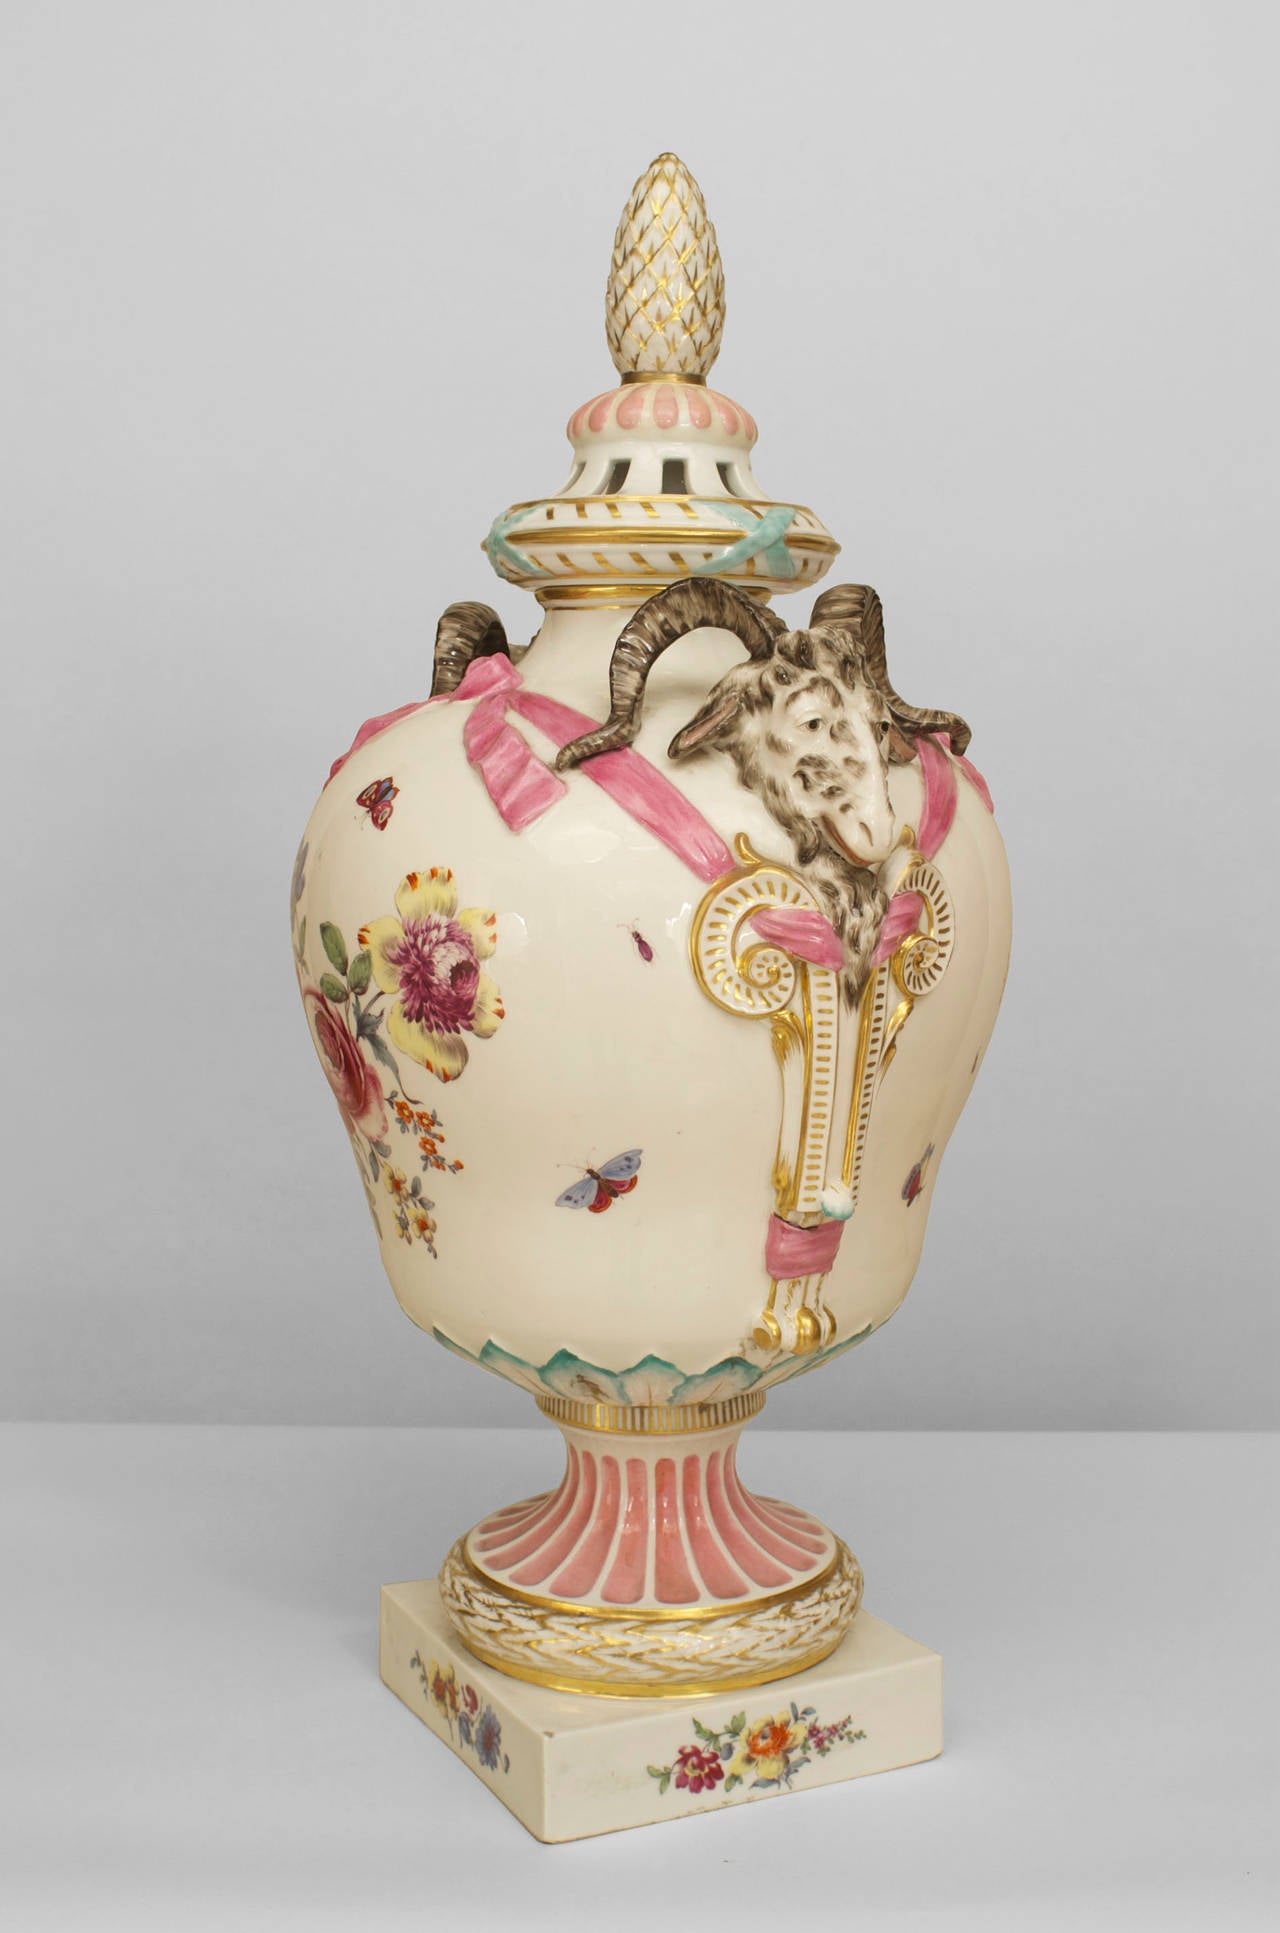 Louis XVI A Fine 18th Century Continental German Porcelain Decorated Urn For Sale